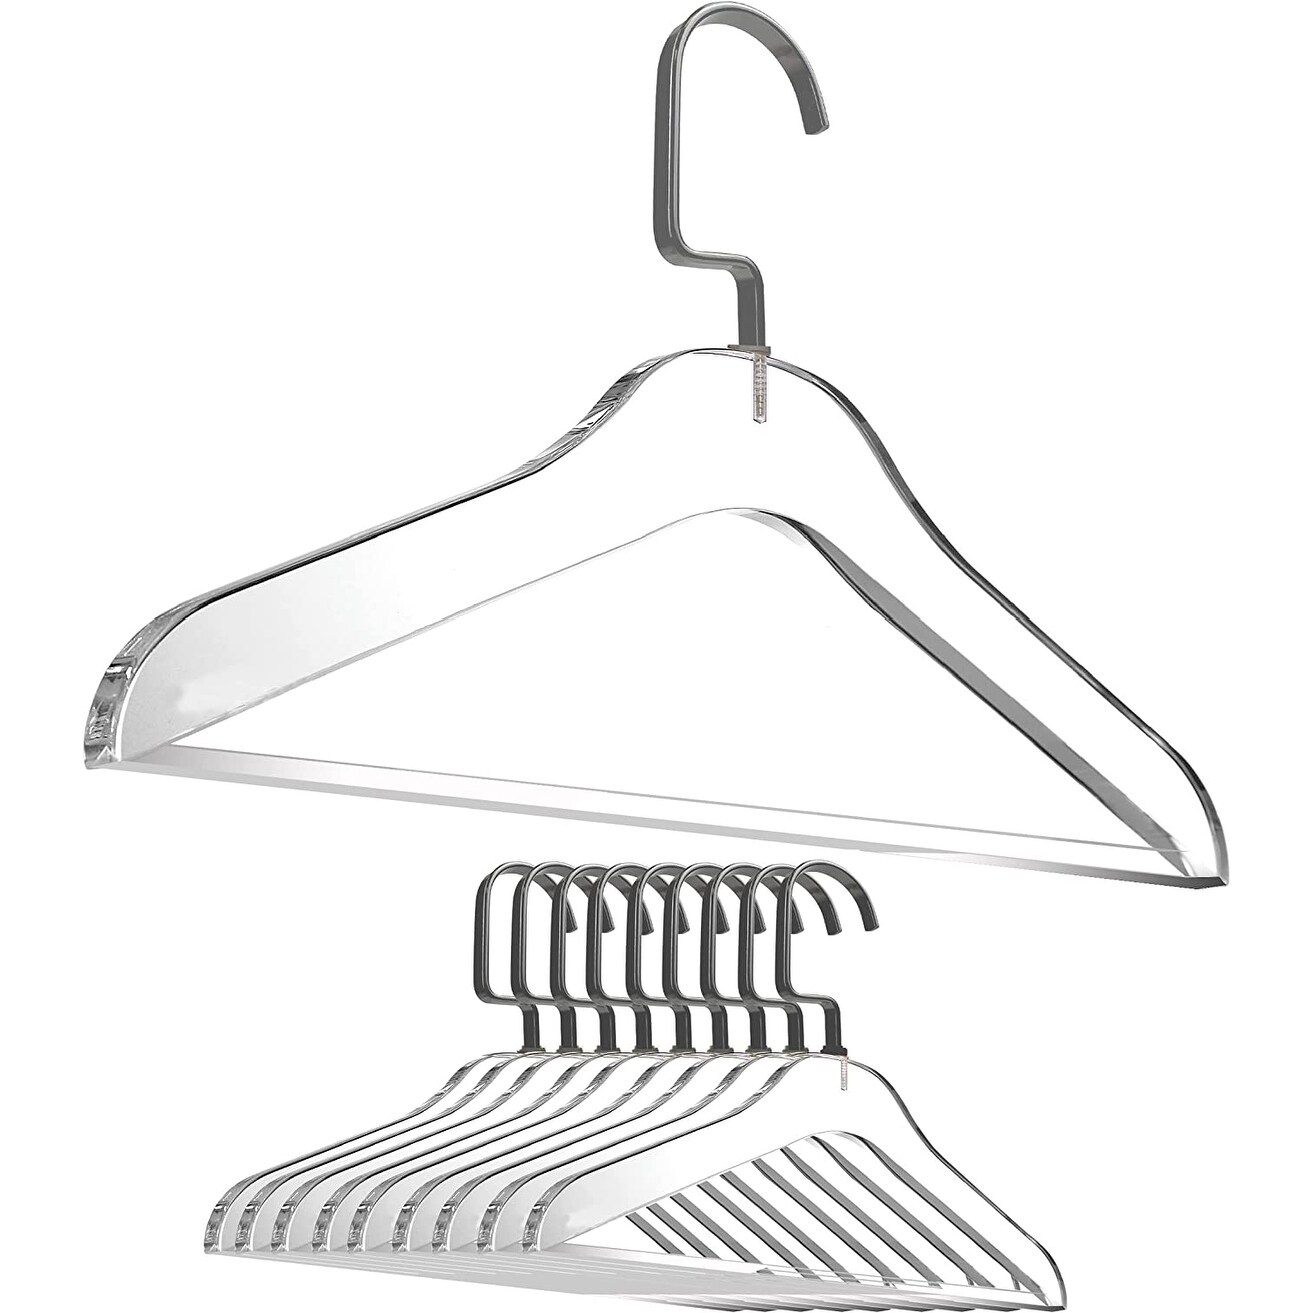 DesignStyles Clear Acrylic Clothes Hangers - 10 Pk - Shiny Black